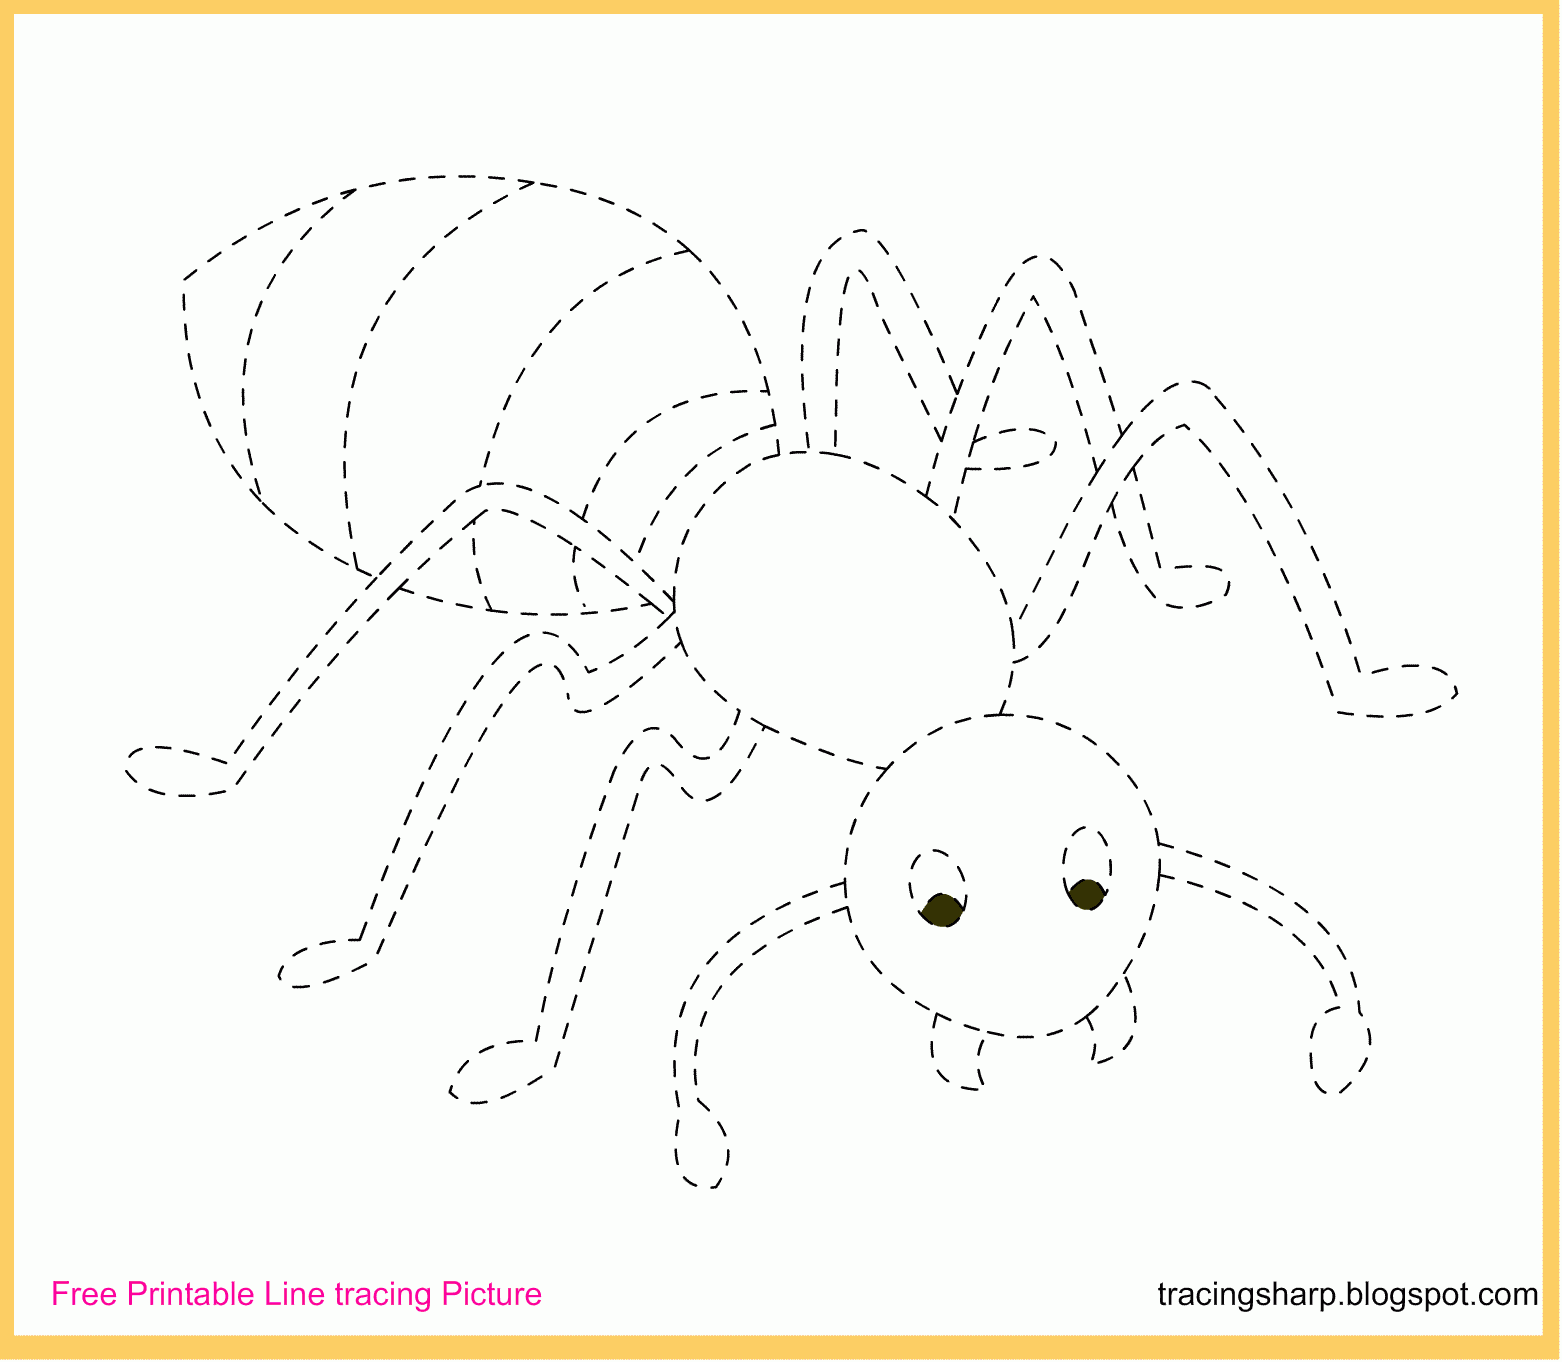 Free Tracing Line Printable Ant Tracing Picture